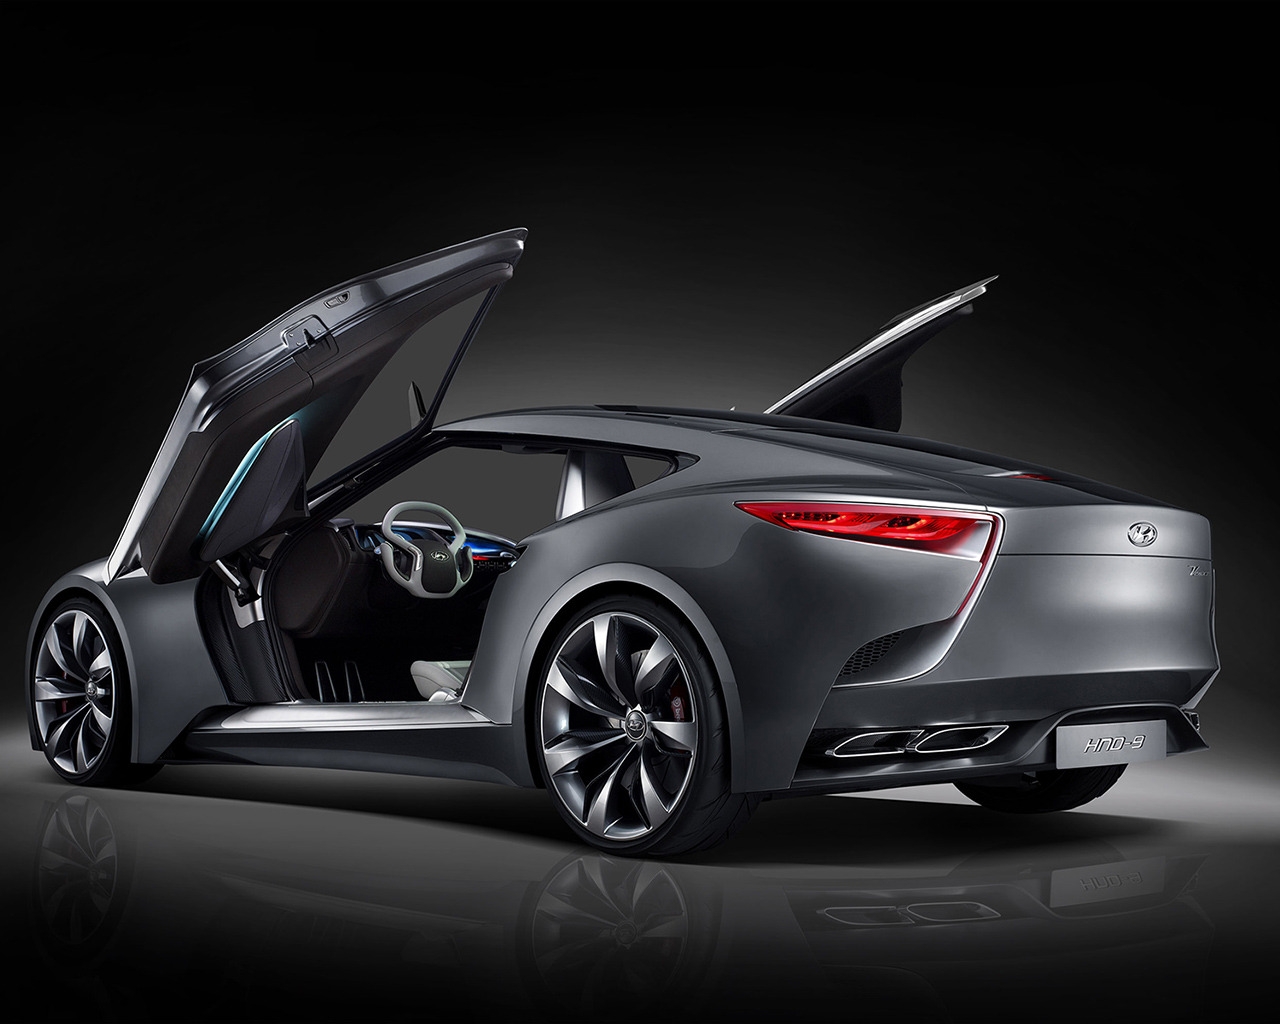 Hyundai Coupe HND Open Doors for 1280 x 1024 resolution